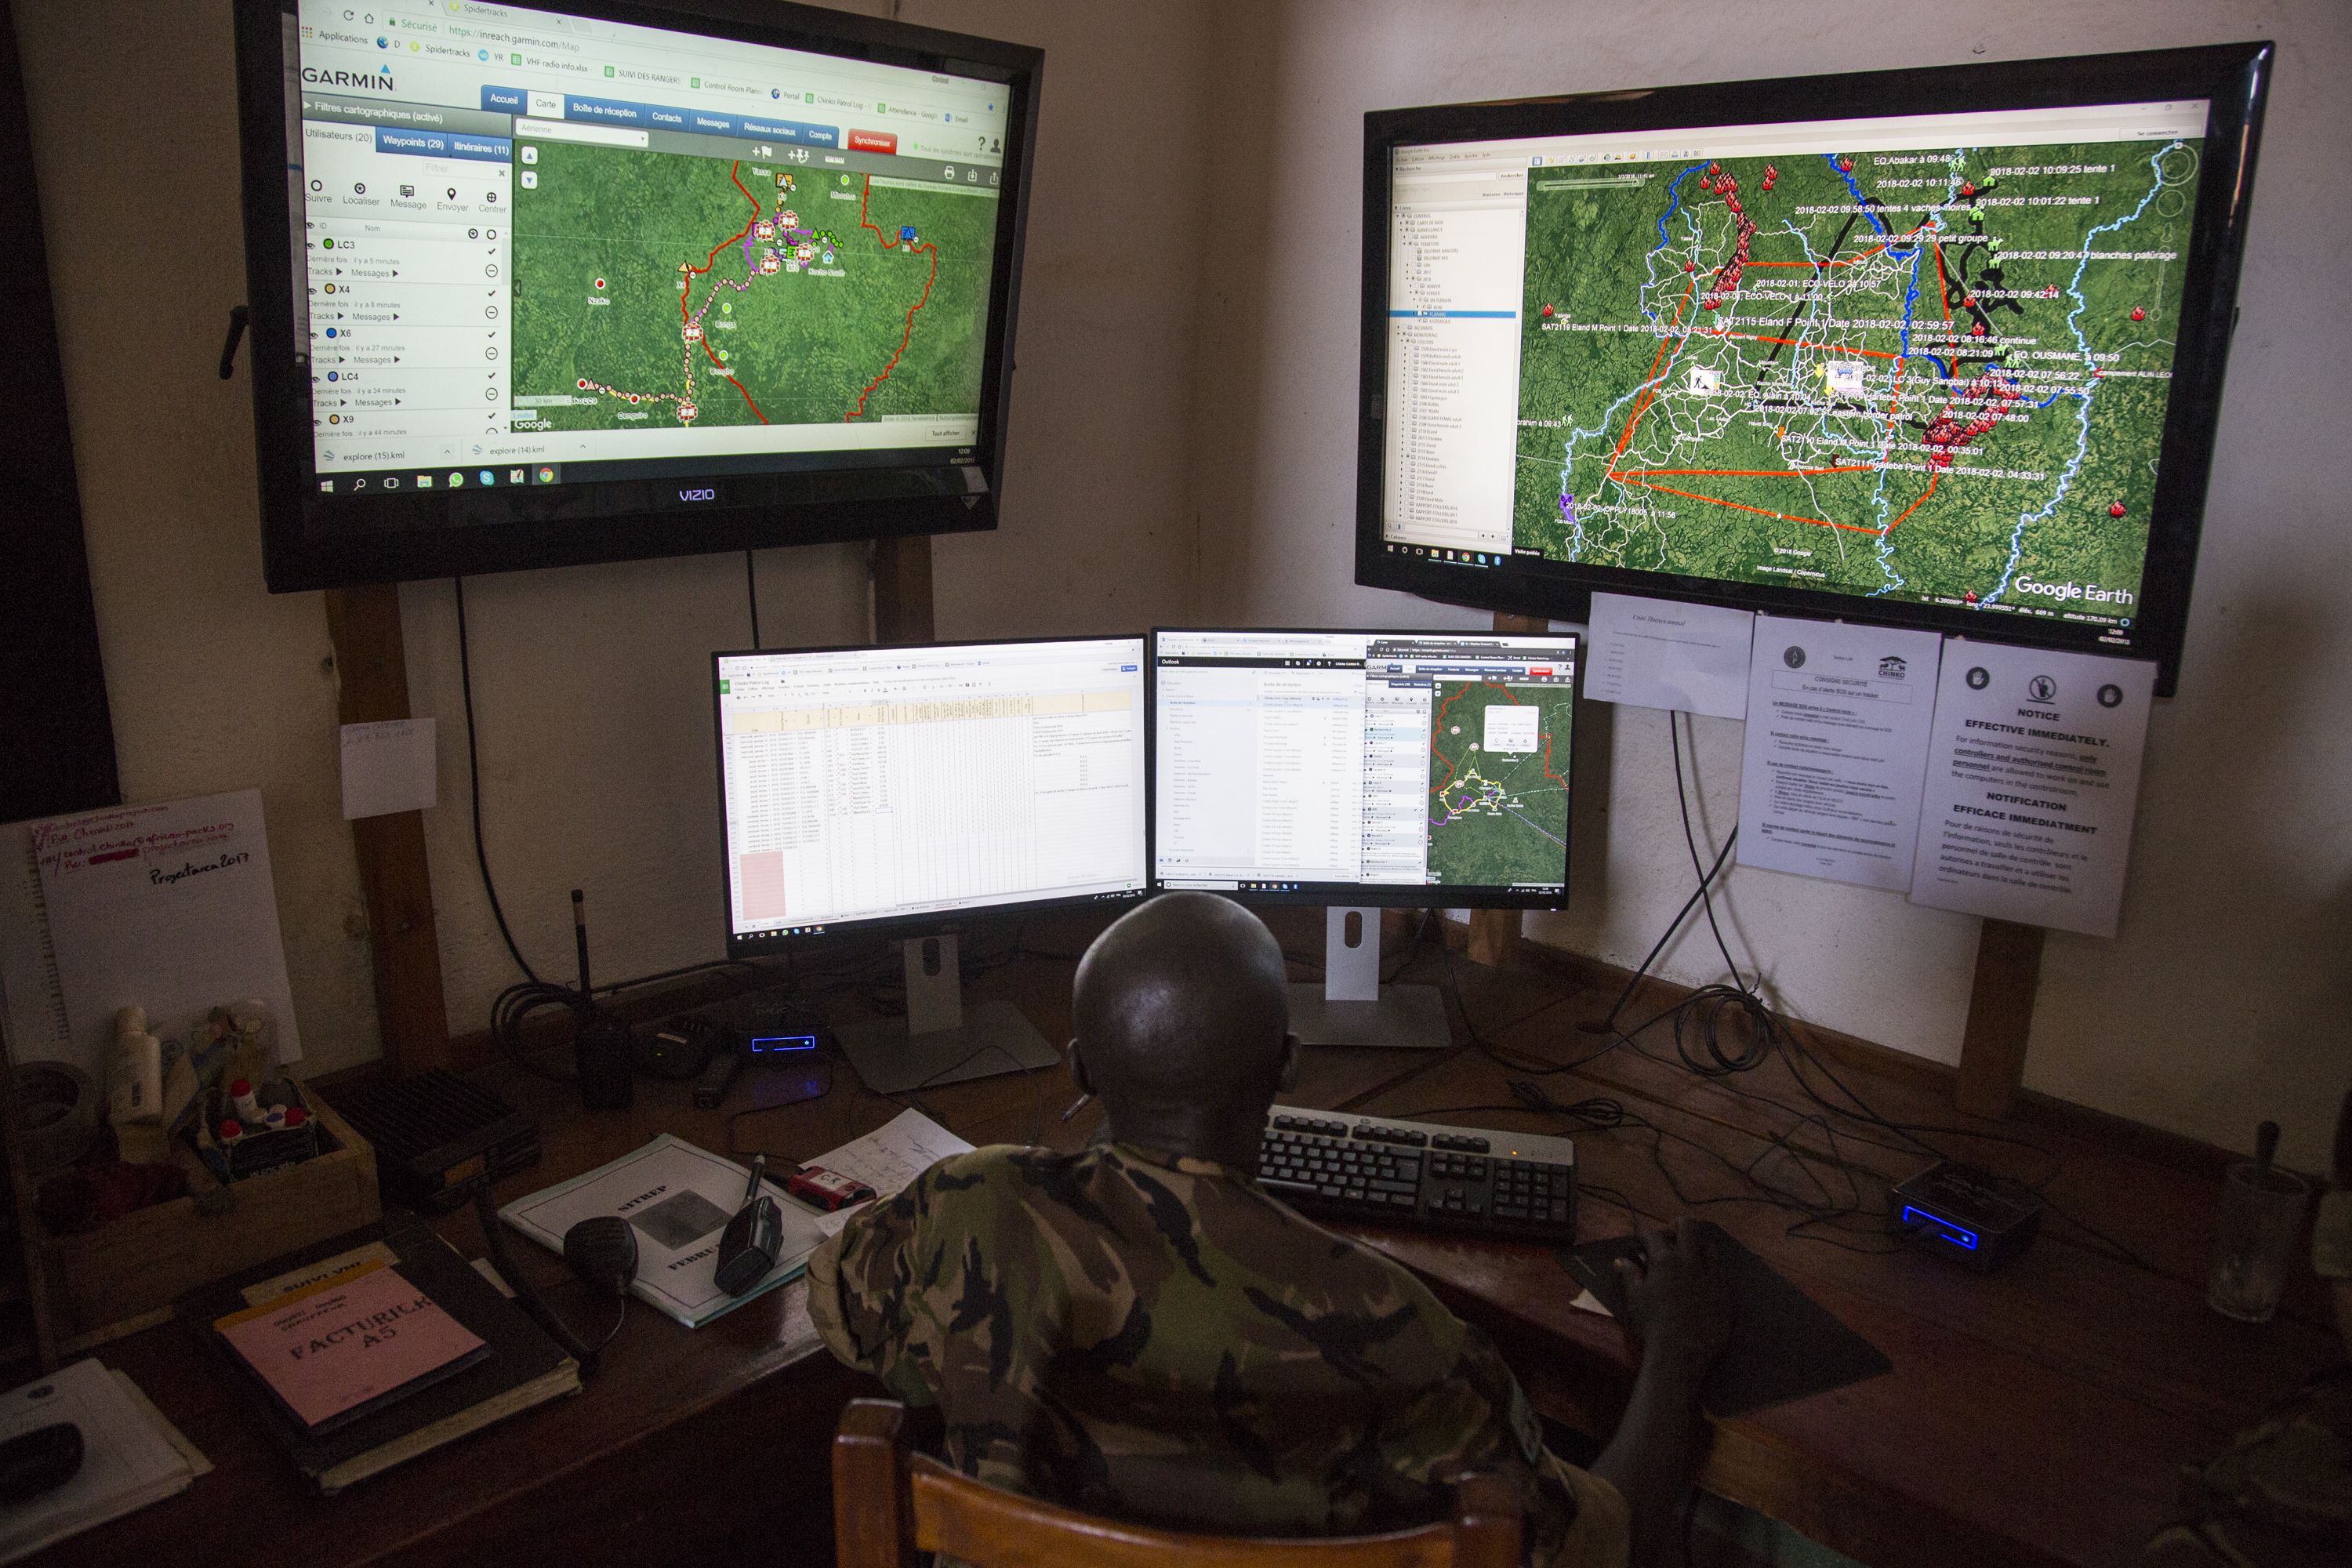 Inside the park’s control room, where software plots ranger movement, bush fires and other crucial information on a Google Earth map. Image by Jack Losh. Central African Republic, 2018.